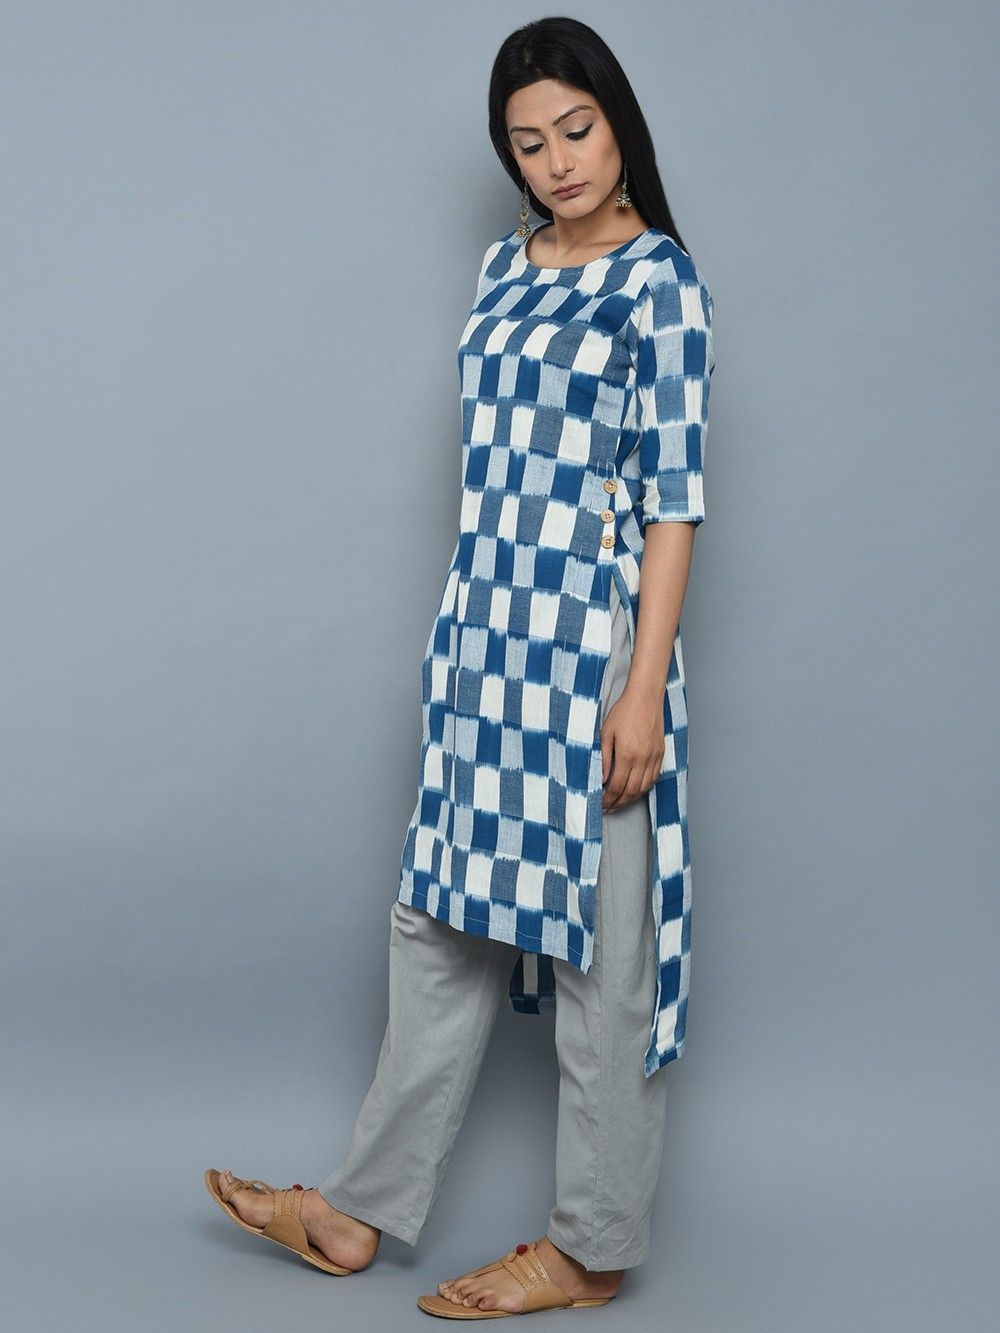 Buy Blue Cotton Side Button Ikat Kurta Online At Theloom